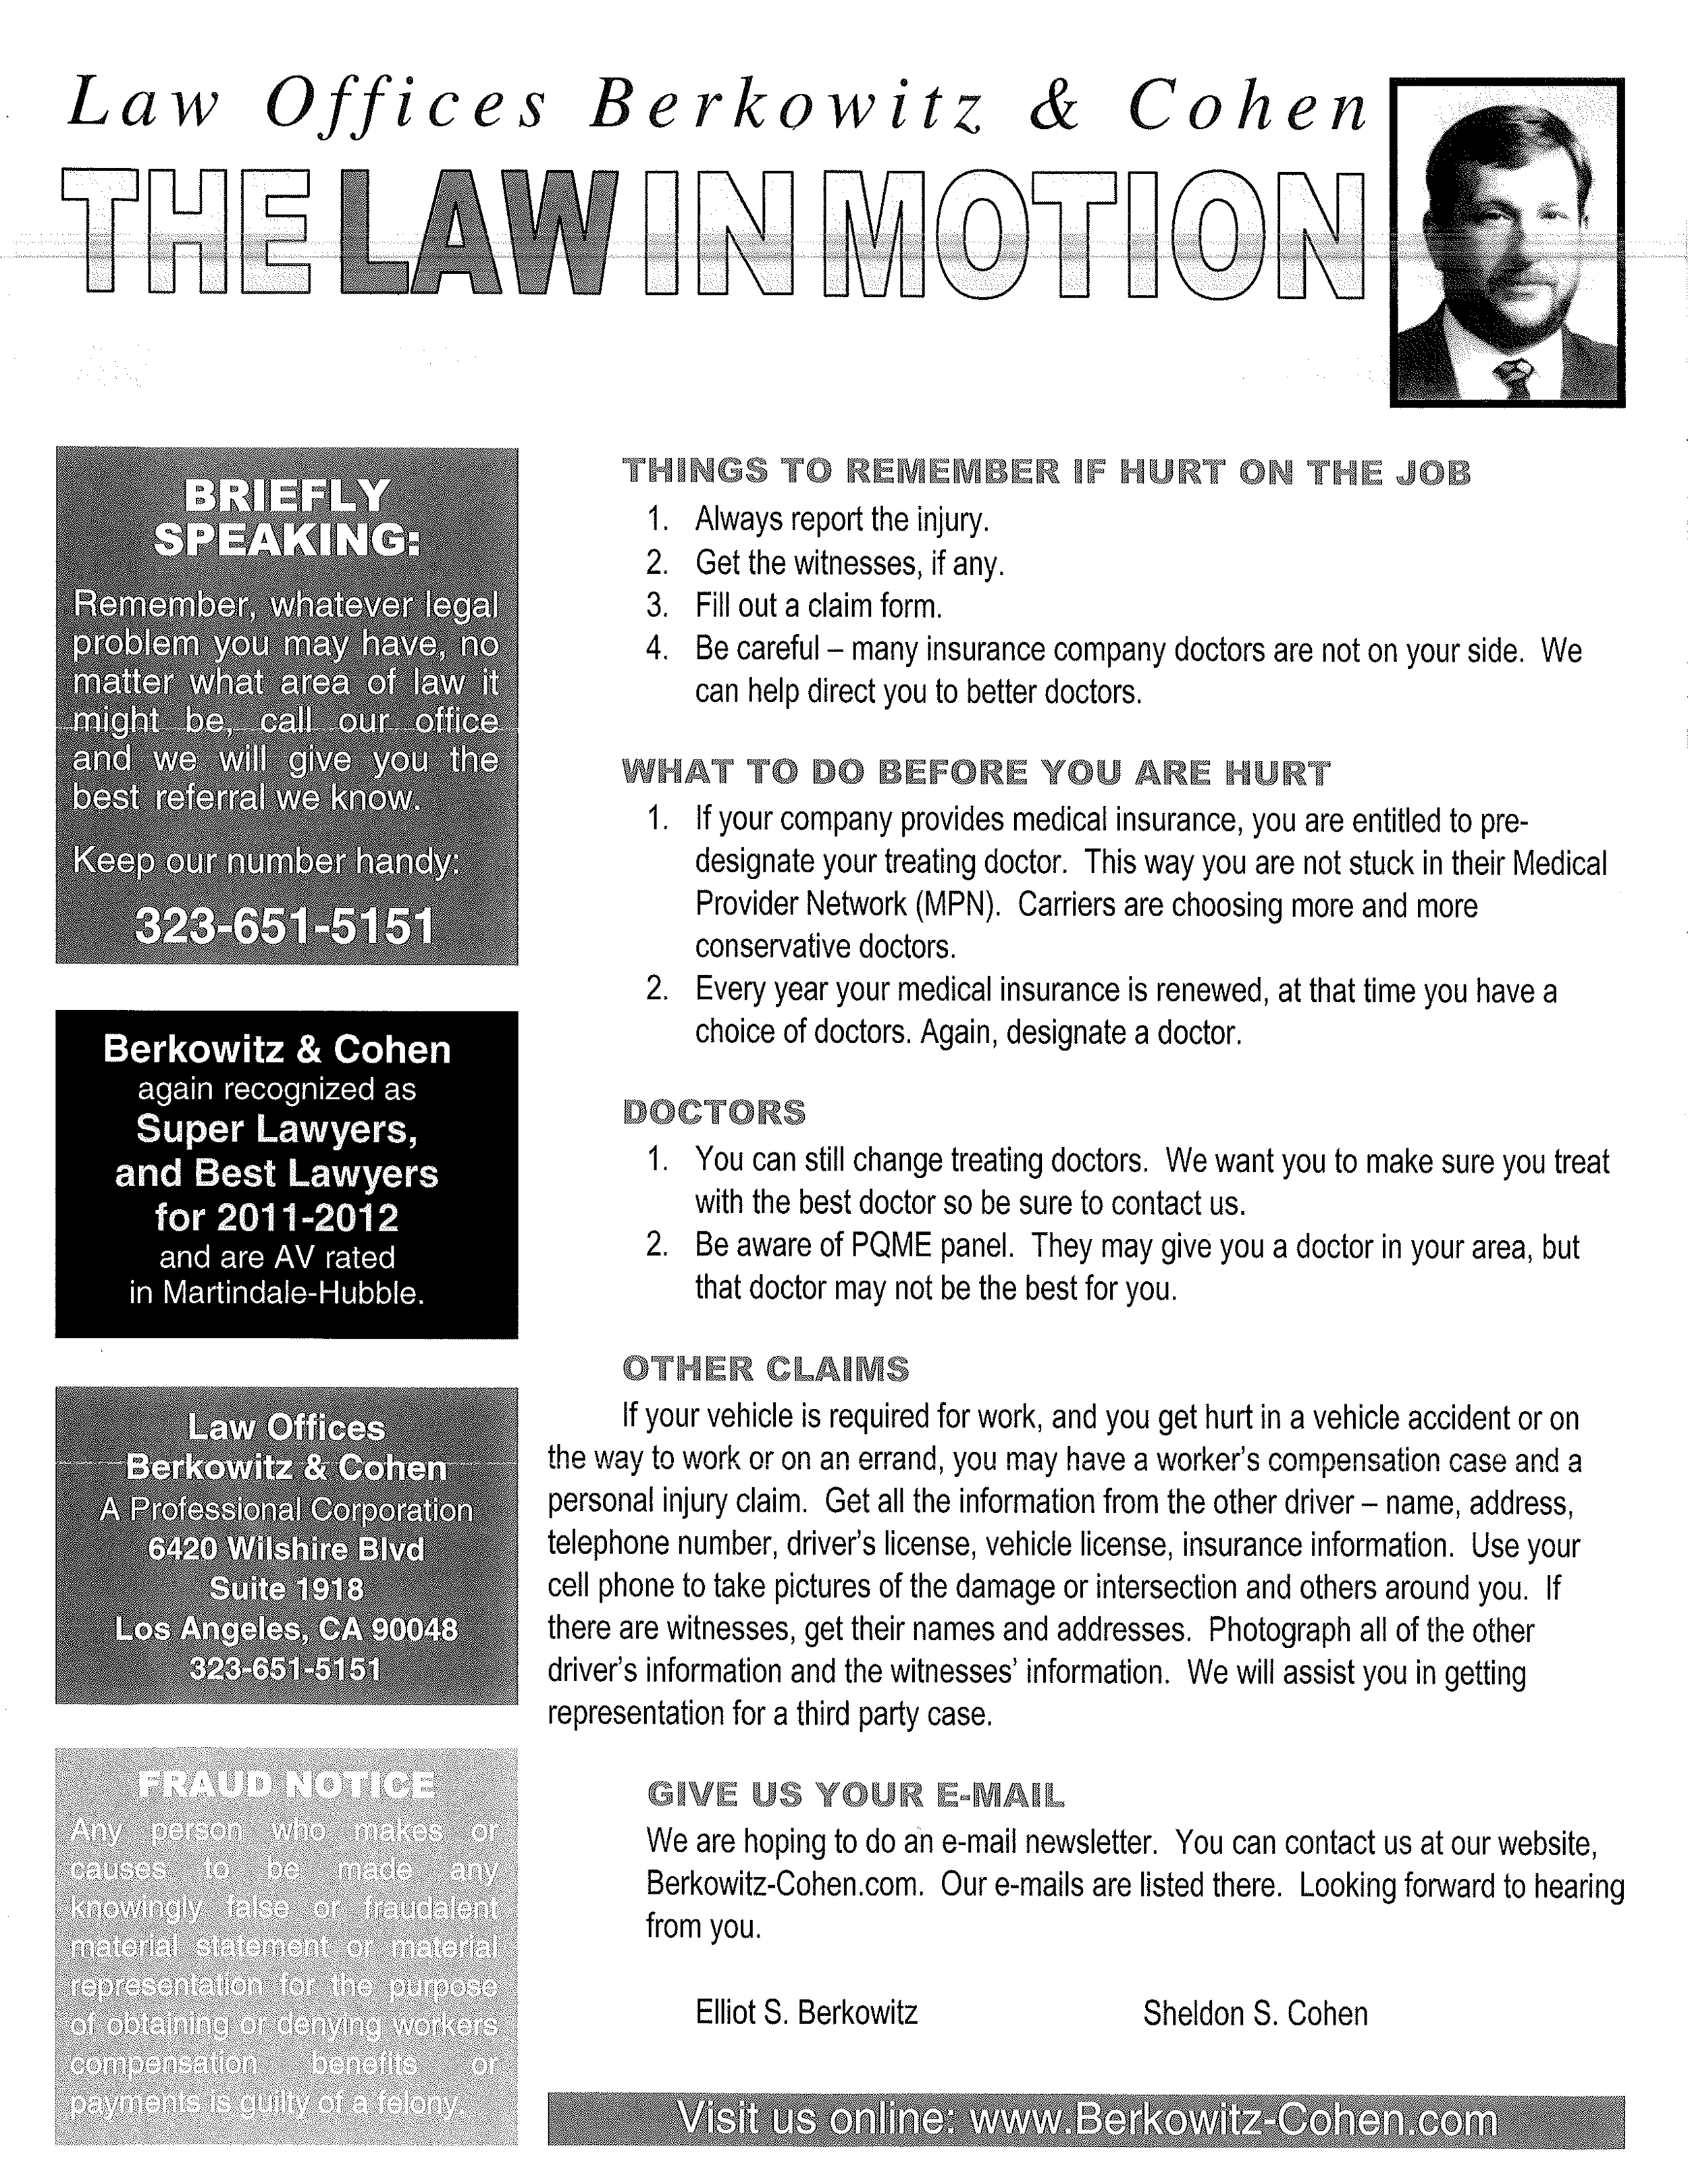 Law in Motion - Newsletters_Page_1.png